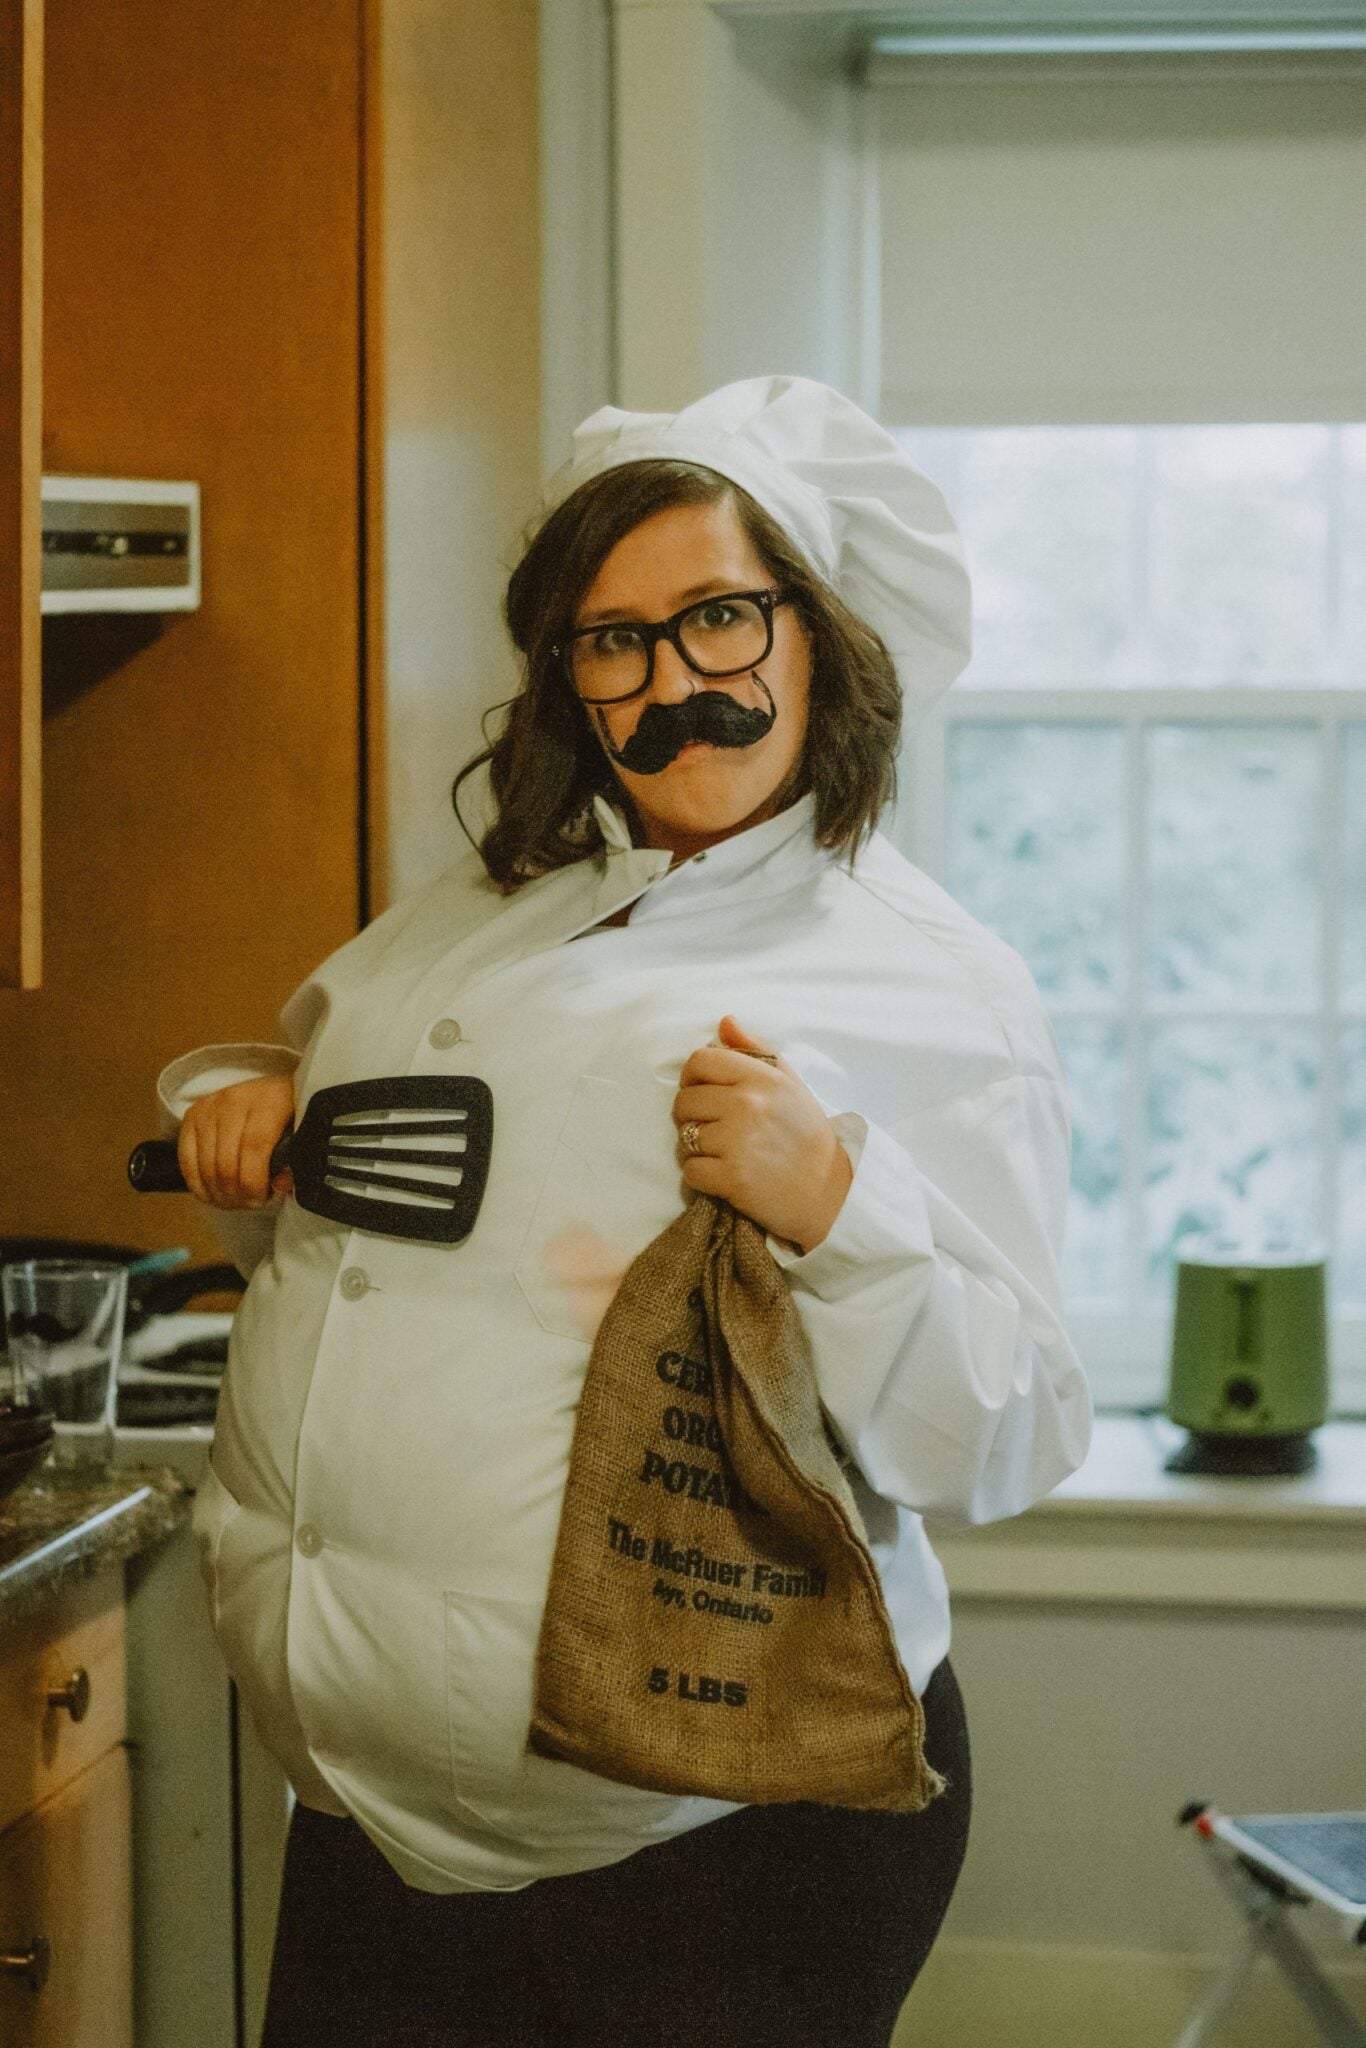 Jacquie shows off her chef costume, wearing a white shirt stuffed with pillows, a fake mustache and chef hat.